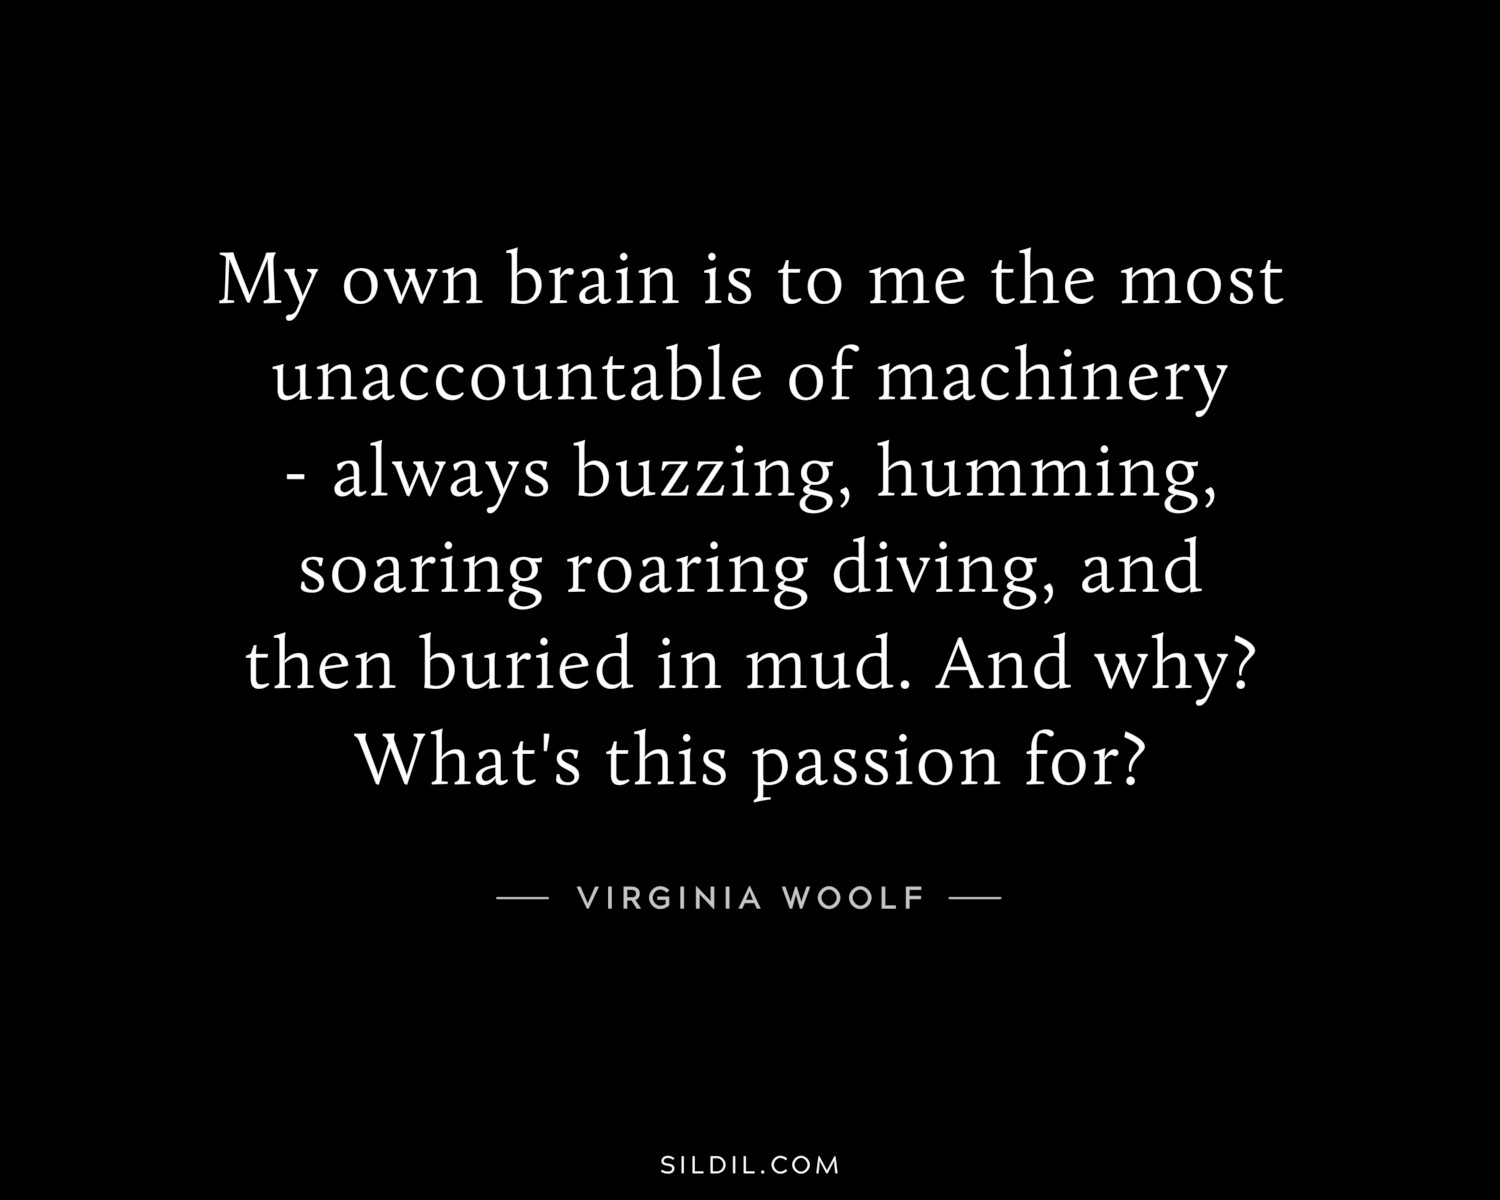 My own brain is to me the most unaccountable of machinery - always buzzing, humming, soaring roaring diving, and then buried in mud. And why? What's this passion for?